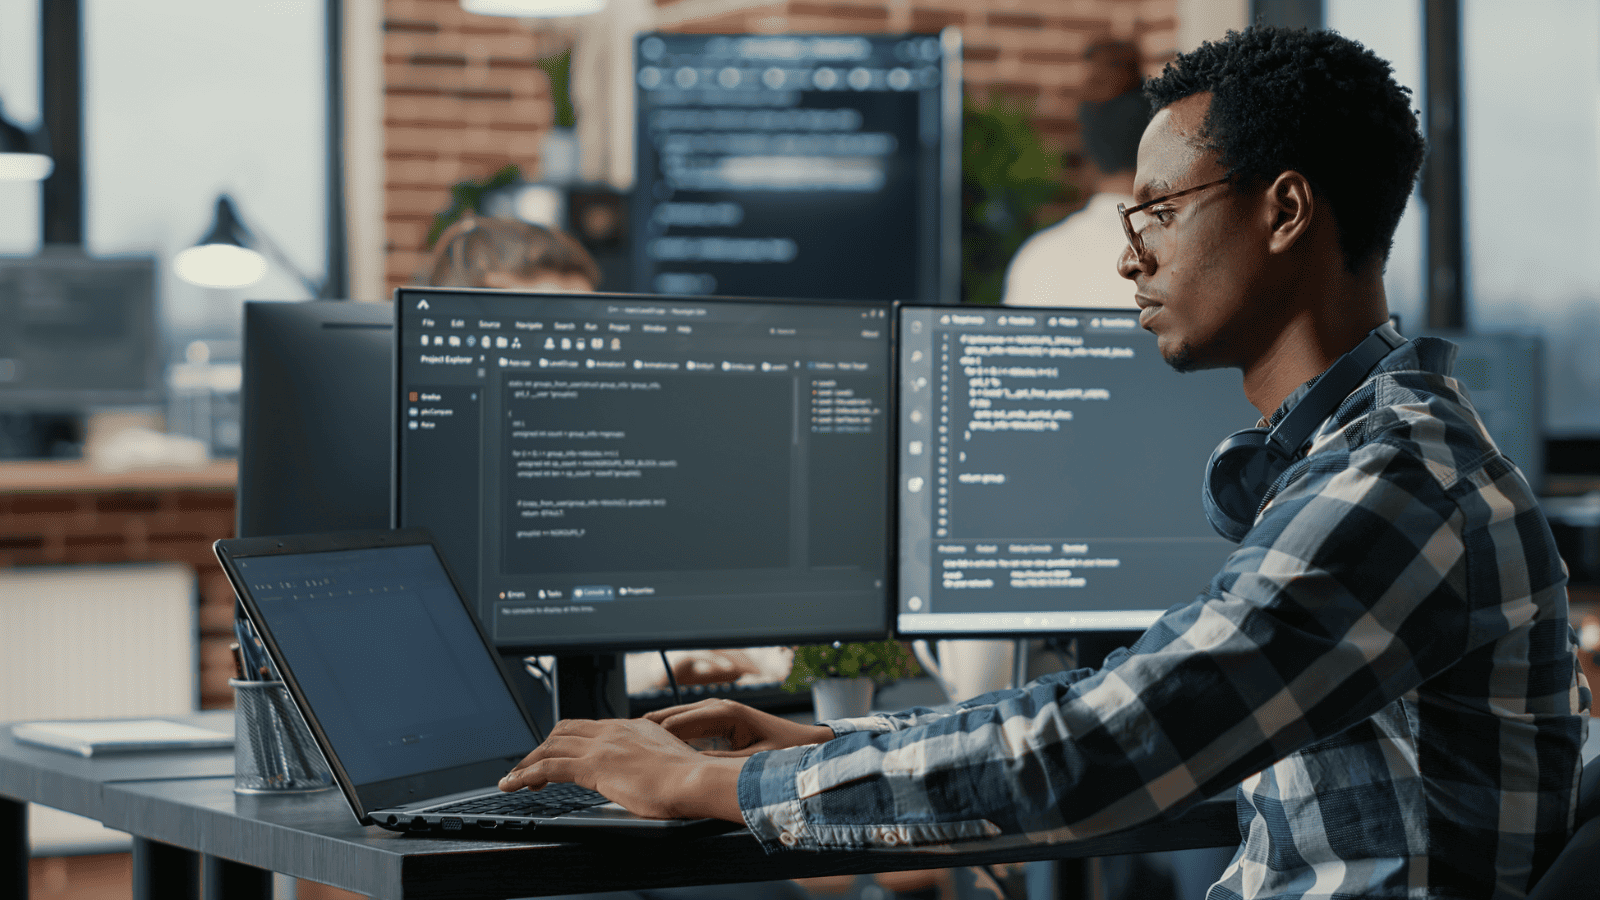 <p>Software developers love creating and improving computer programs and apps. Since their skills are so important in the tech world, they're in high demand and earn a good salary. According to <a href="https://money.usnews.com/careers/best-jobs/software-developer/salary">U.S. News</a>, “The BLS projects the software development field will grow by about 26% by 2032, with 410,400 jobs added by that time.”</p>